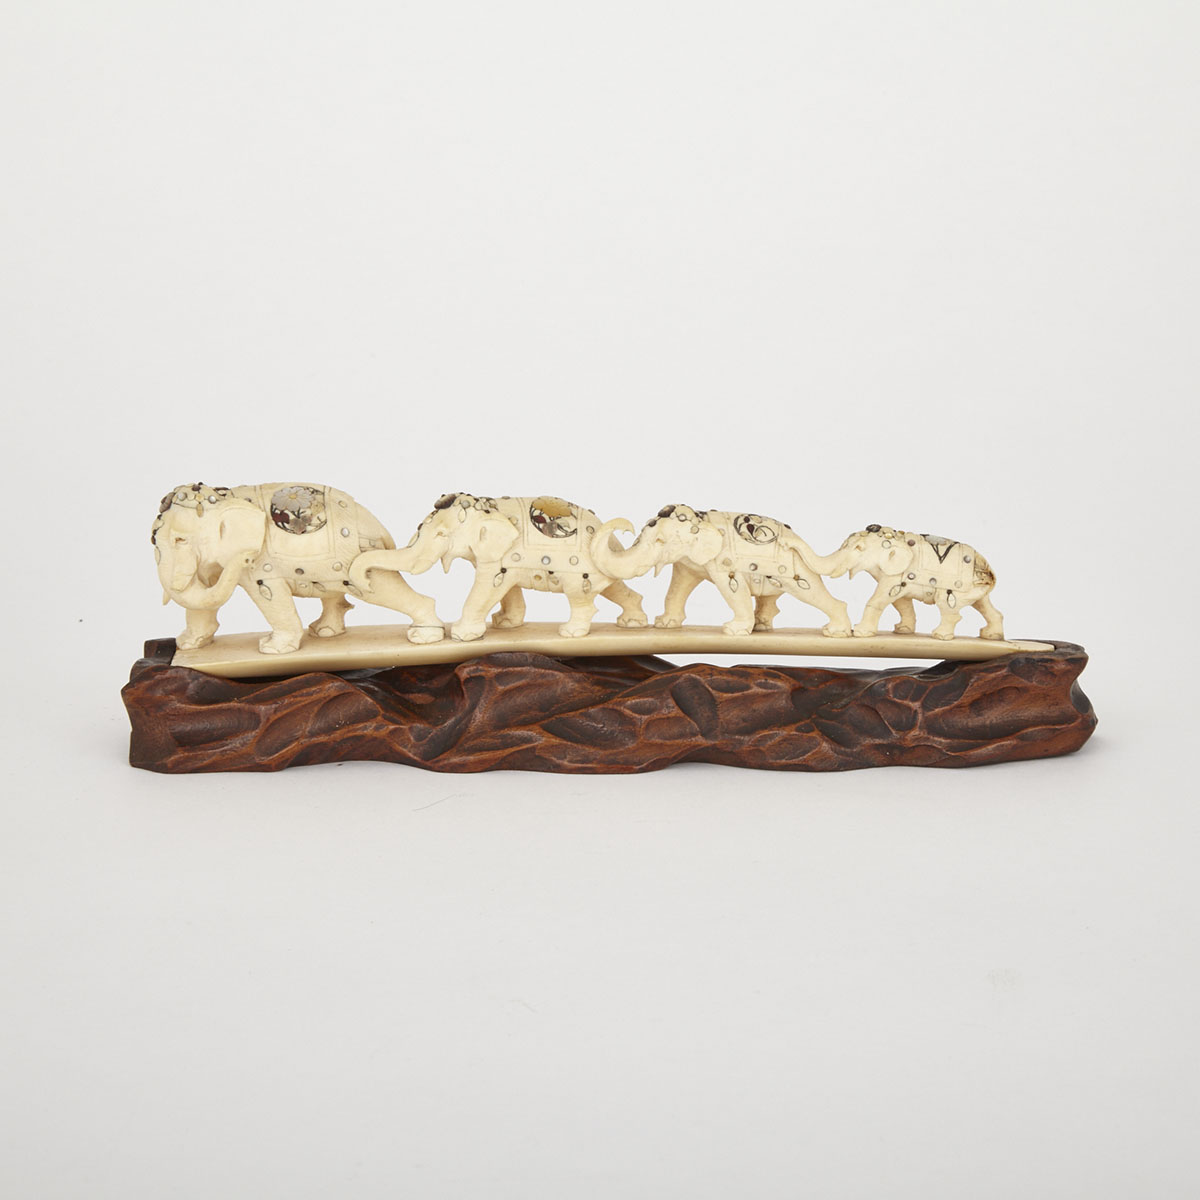 Carved Ivory Elephants, India, Late 19th Century (Stand Later)